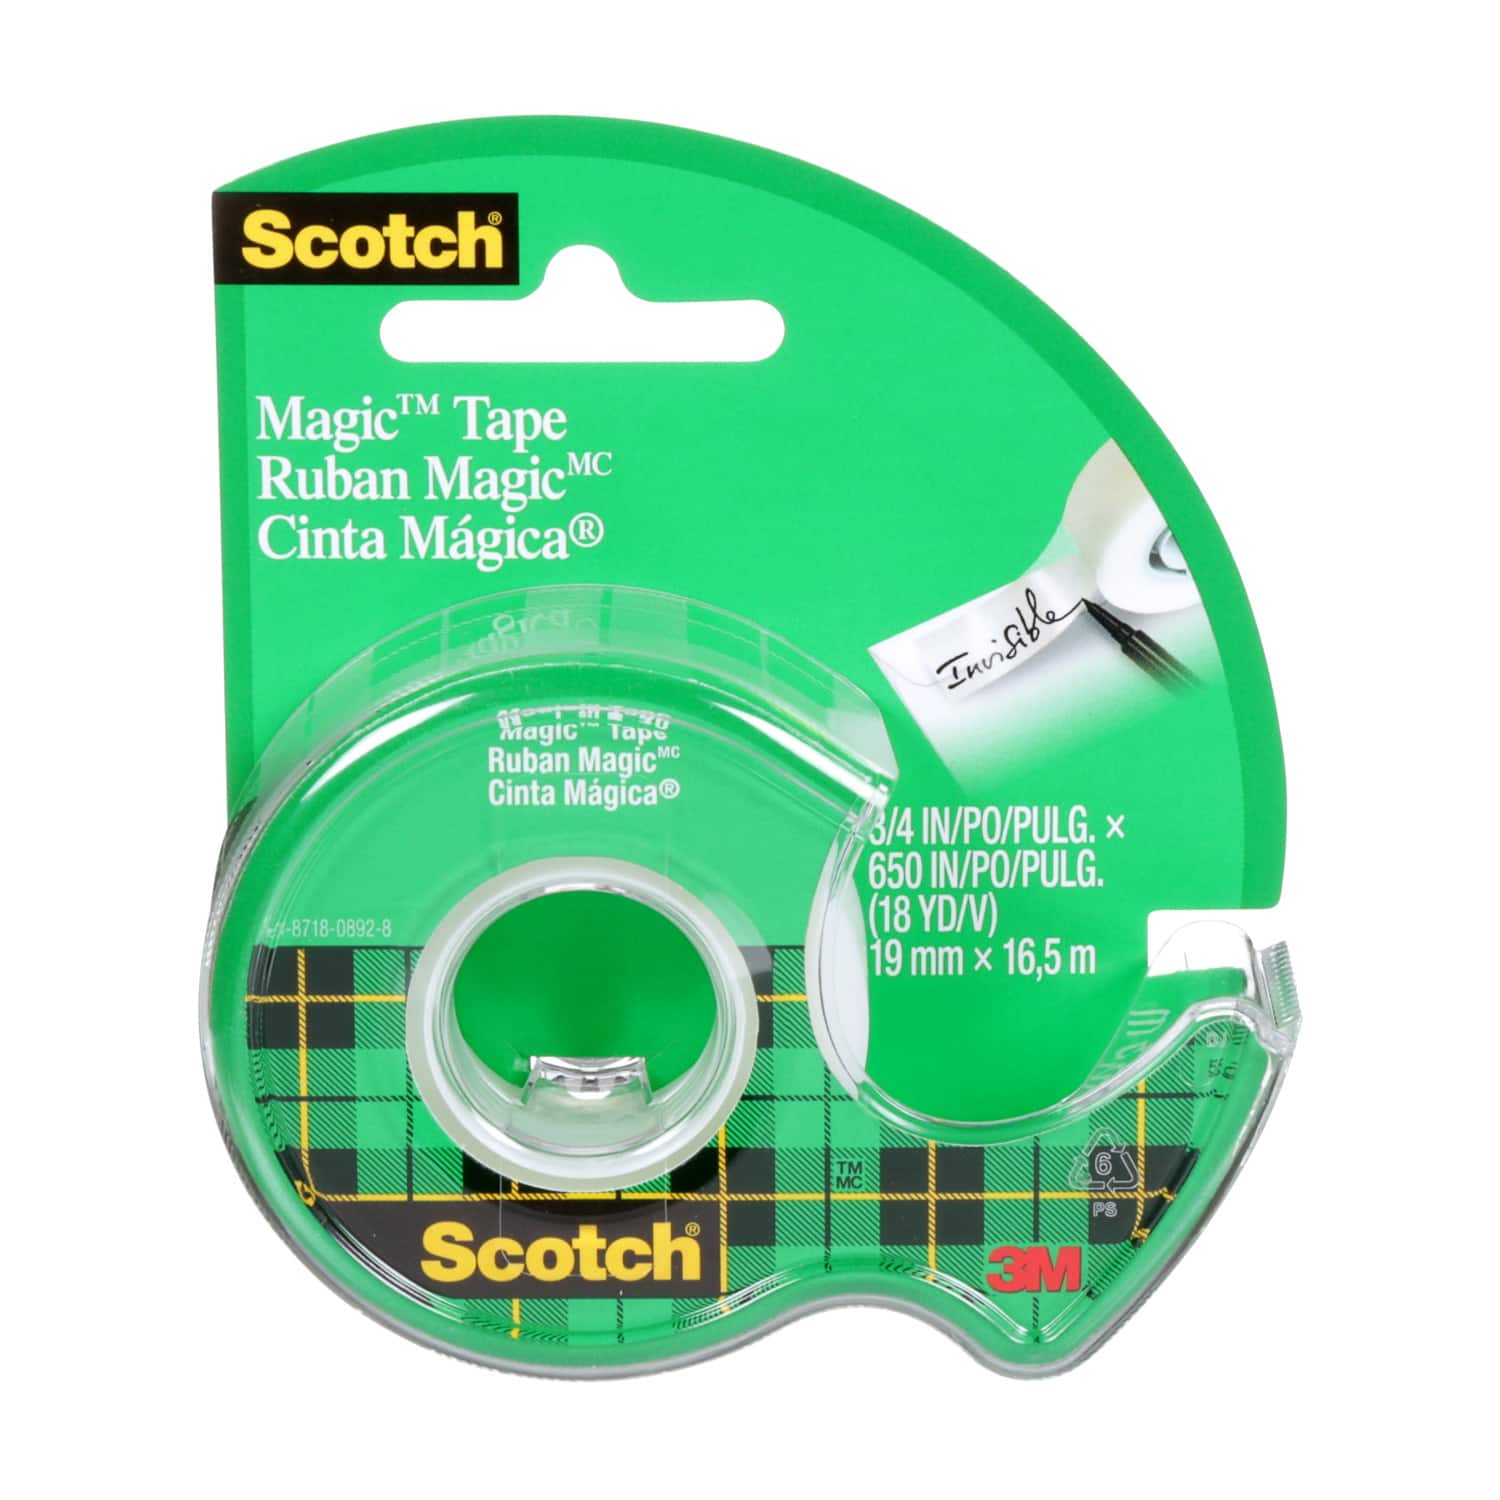 Achieve the Perfect Finish with Scotch Magic Tape and Scotch GiftWrap Tape